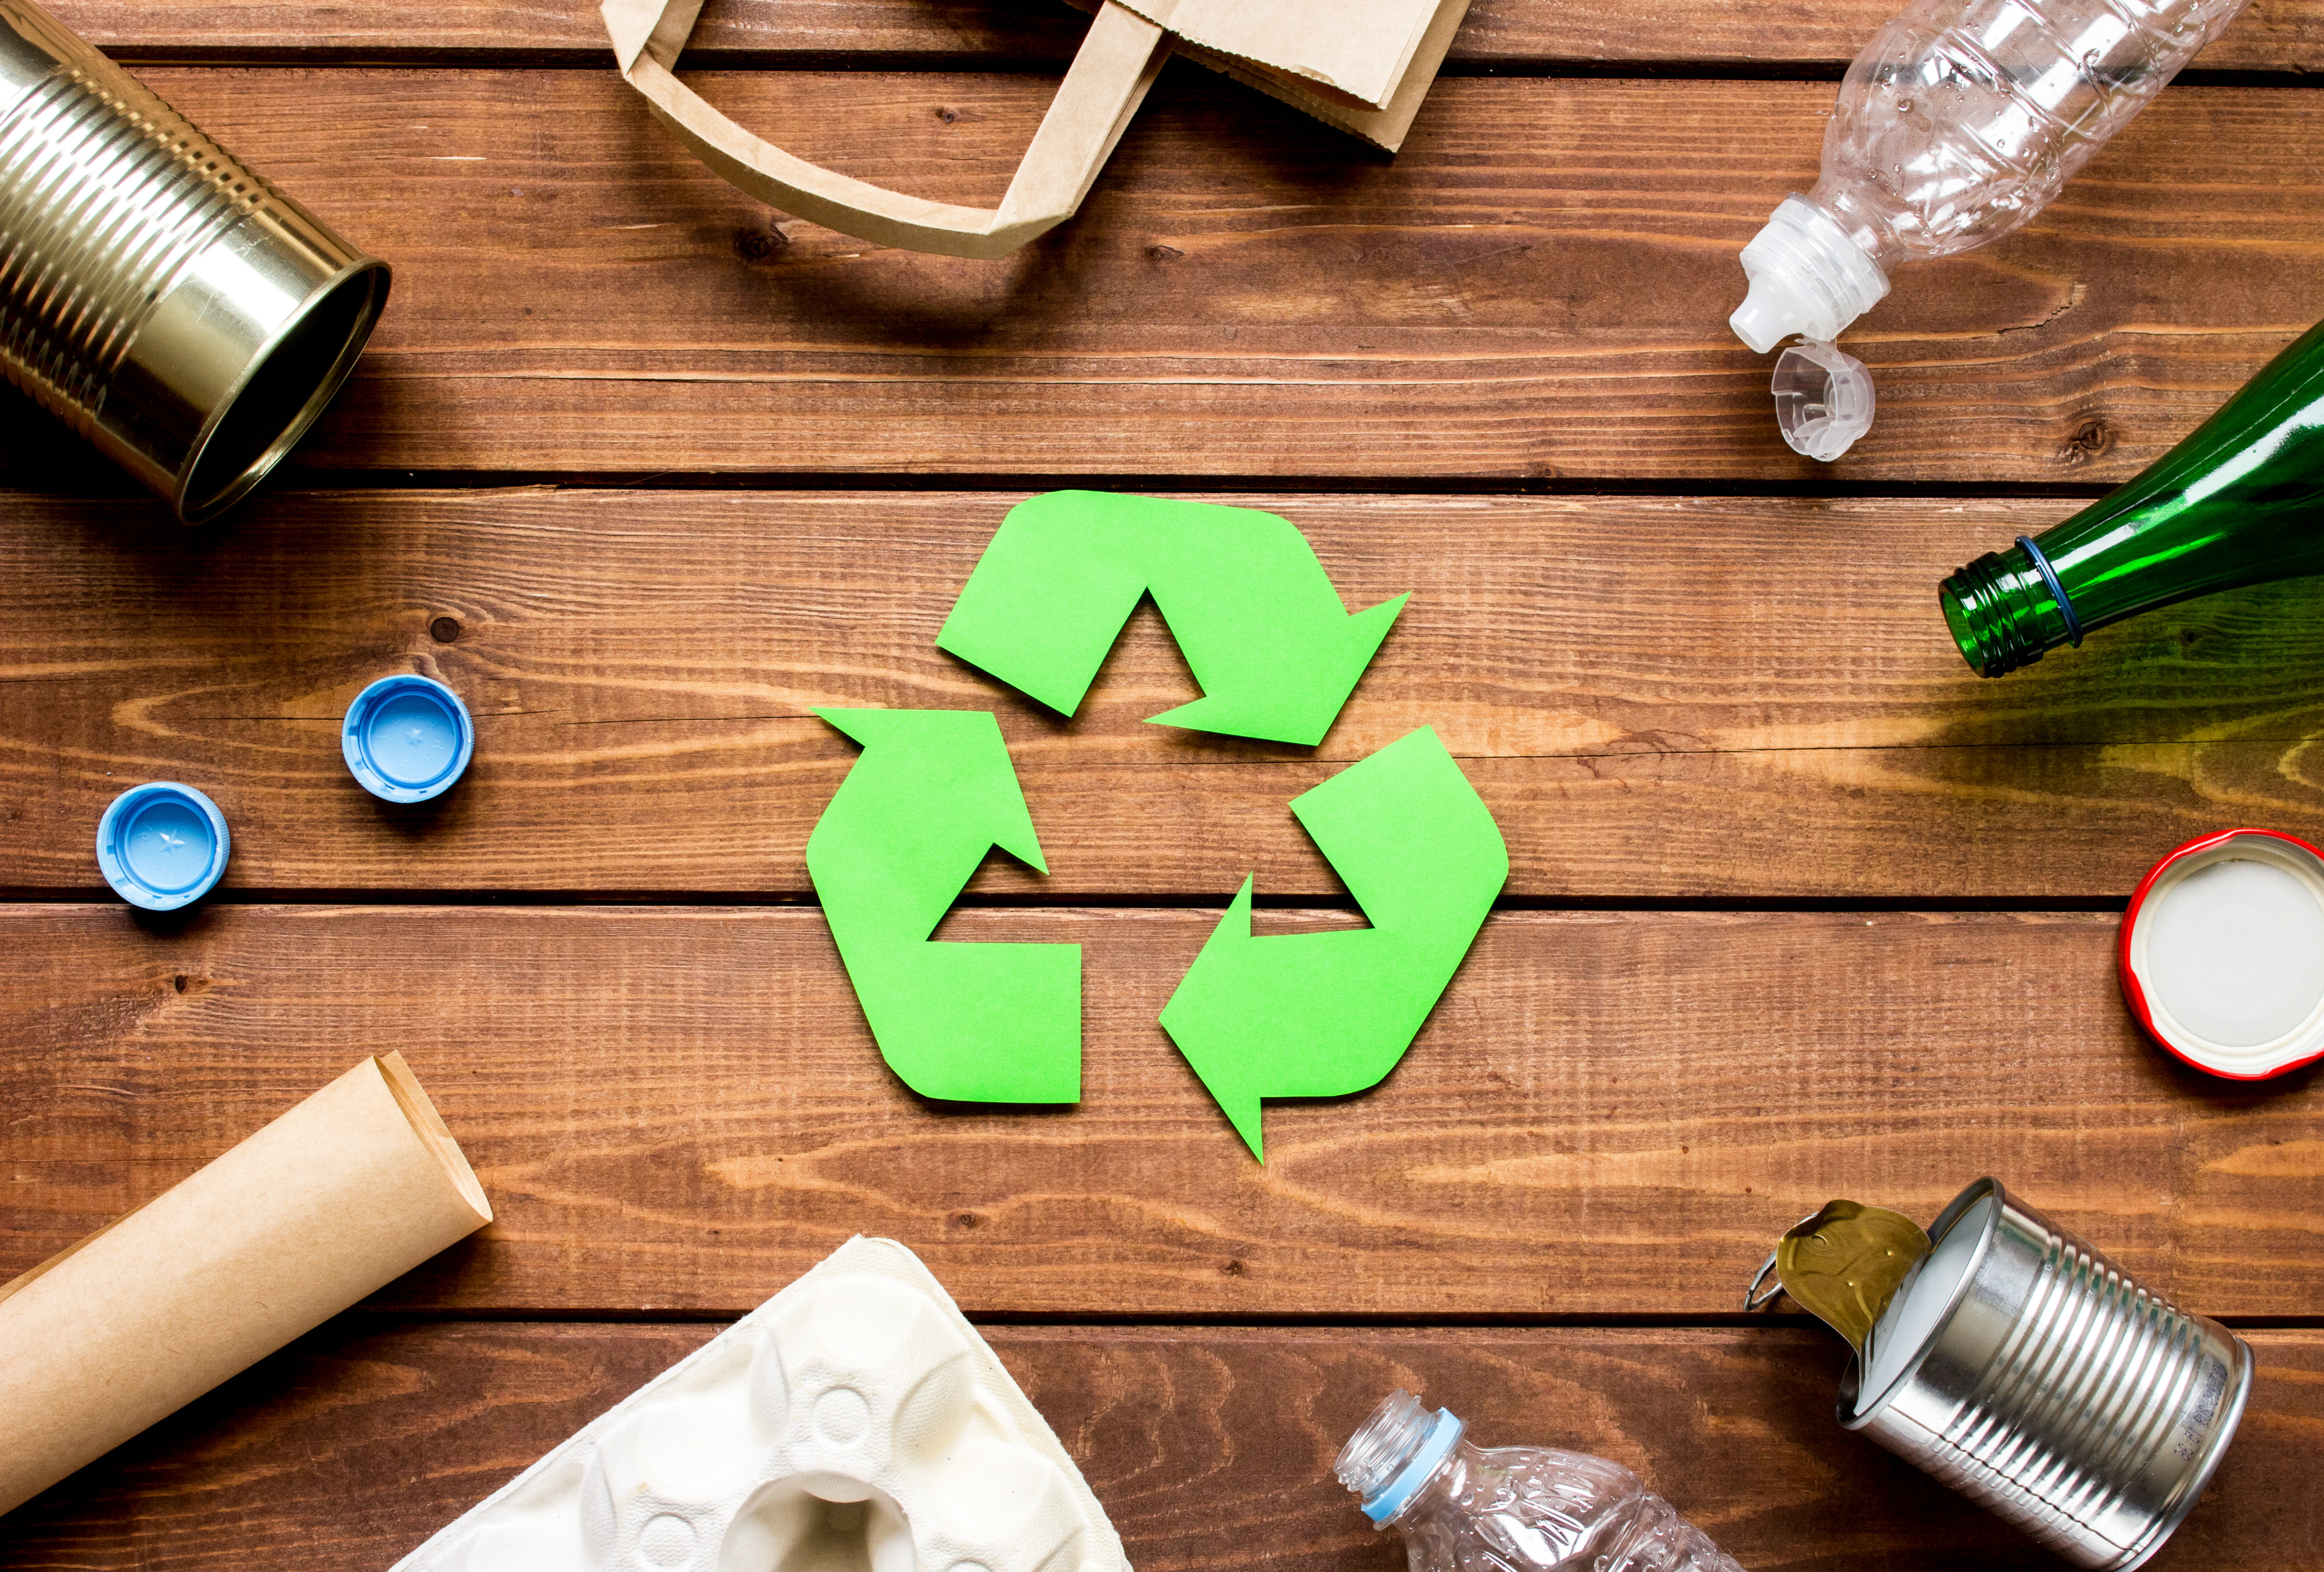 Reduce, reuse and then recycle. Photo: Shutterstock